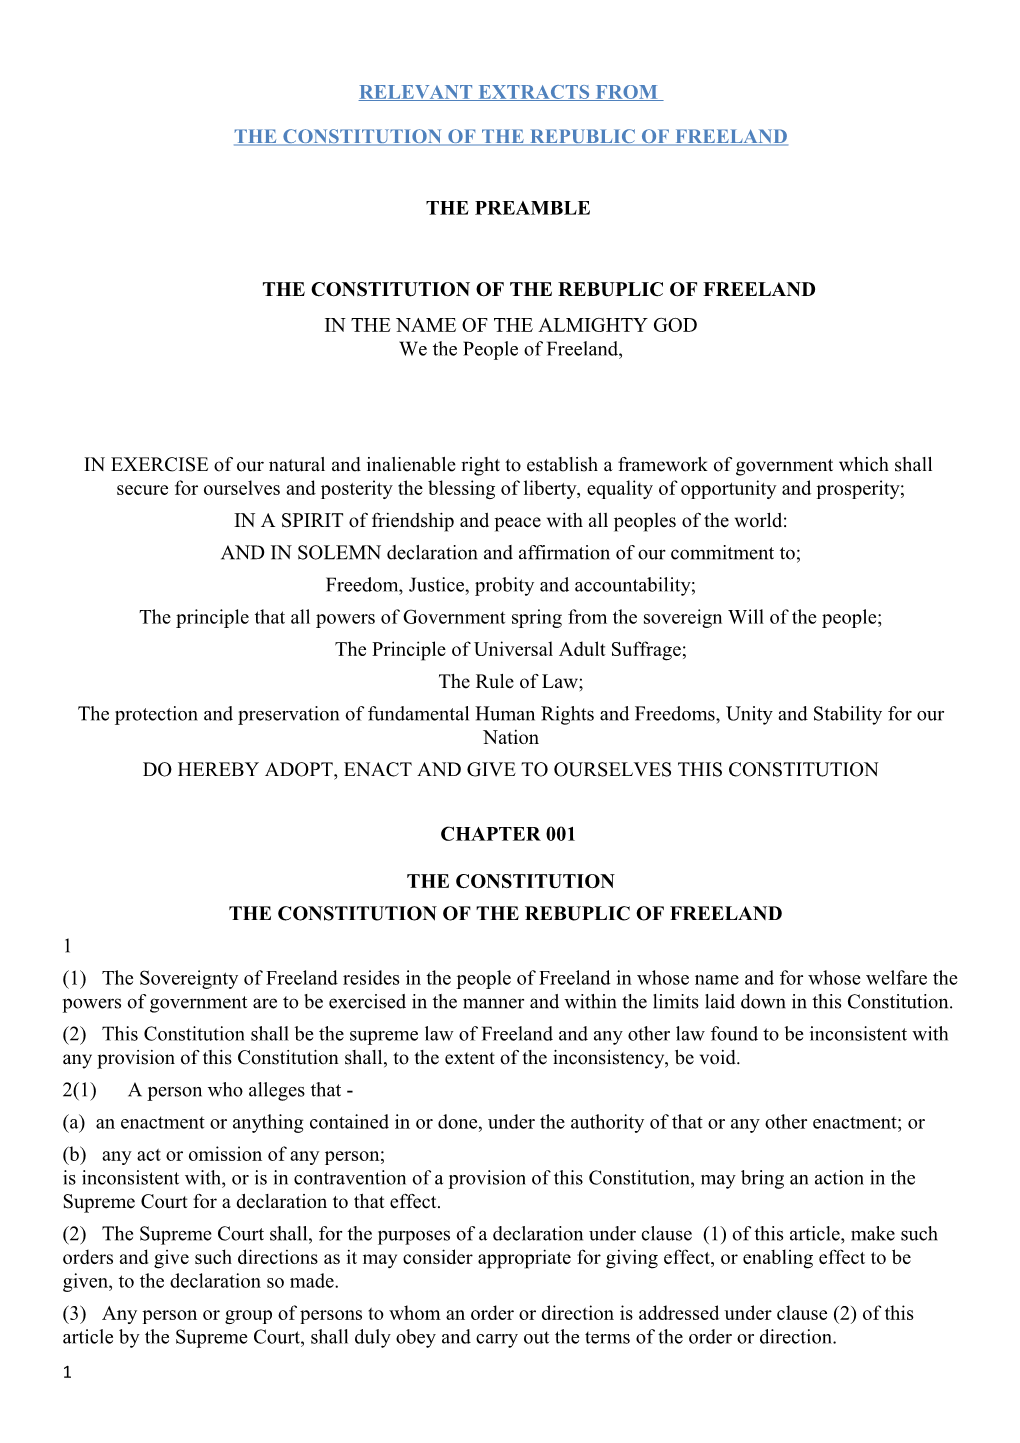 The Constitution of the Republic of Freeland